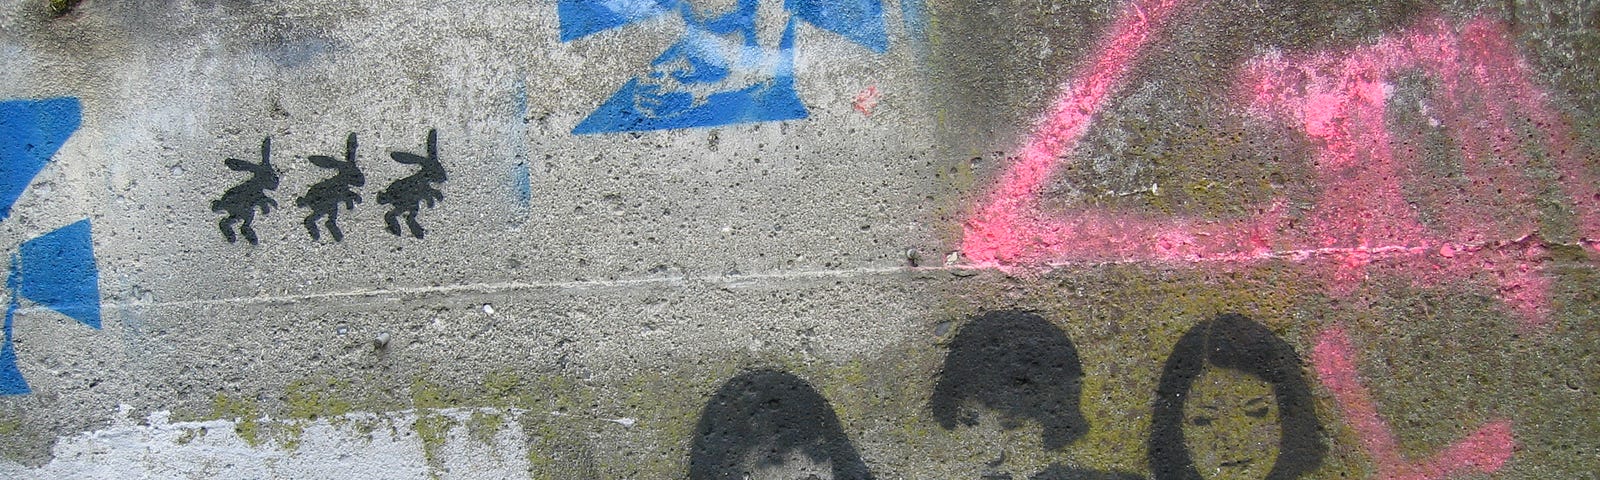 A photo by Moira Cloney, showing green, mouldy concrete covered with graffiti, including a stencil of Sleater-Kinney’s faces.